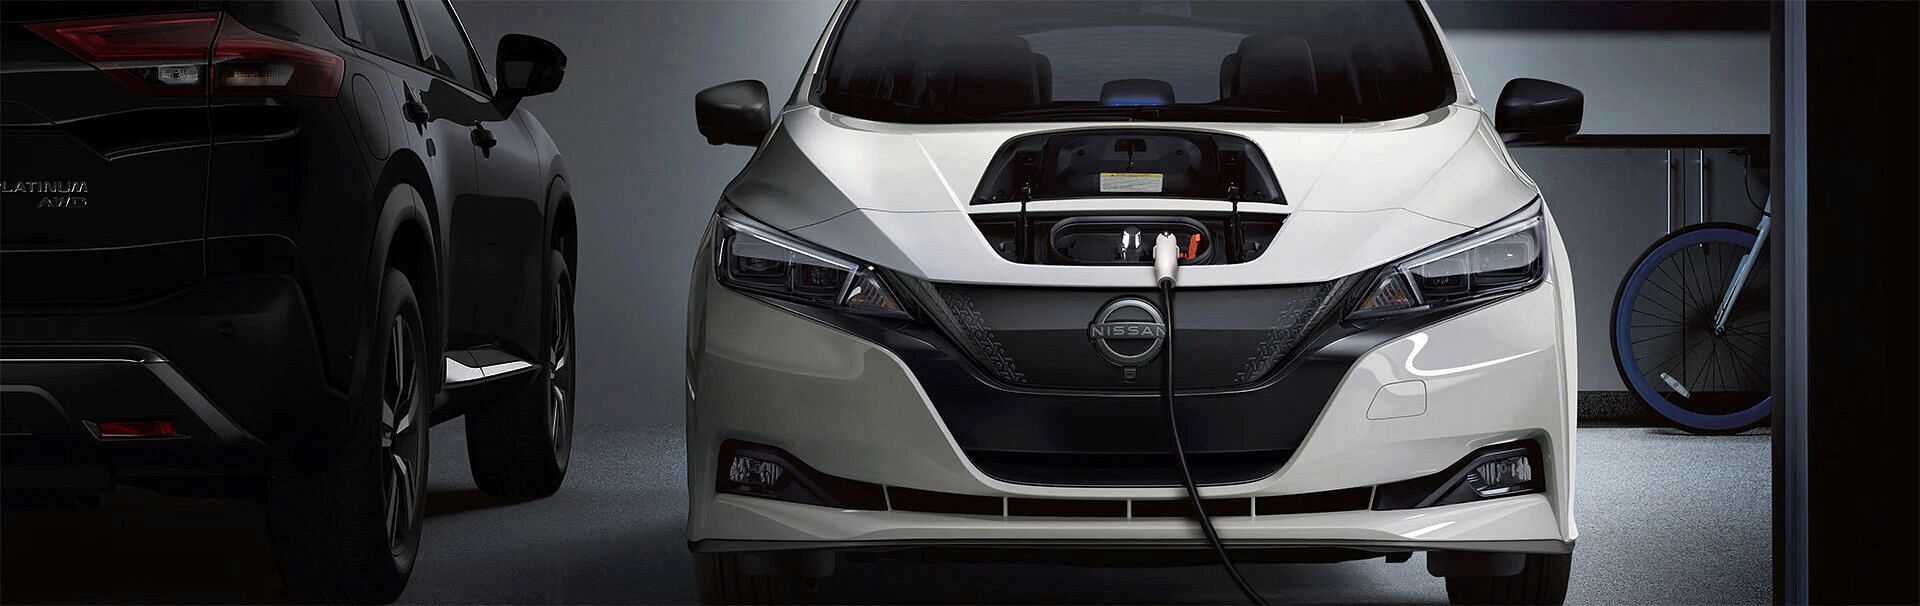 A white Nissan Leaf EV parked with charging port plugged in.